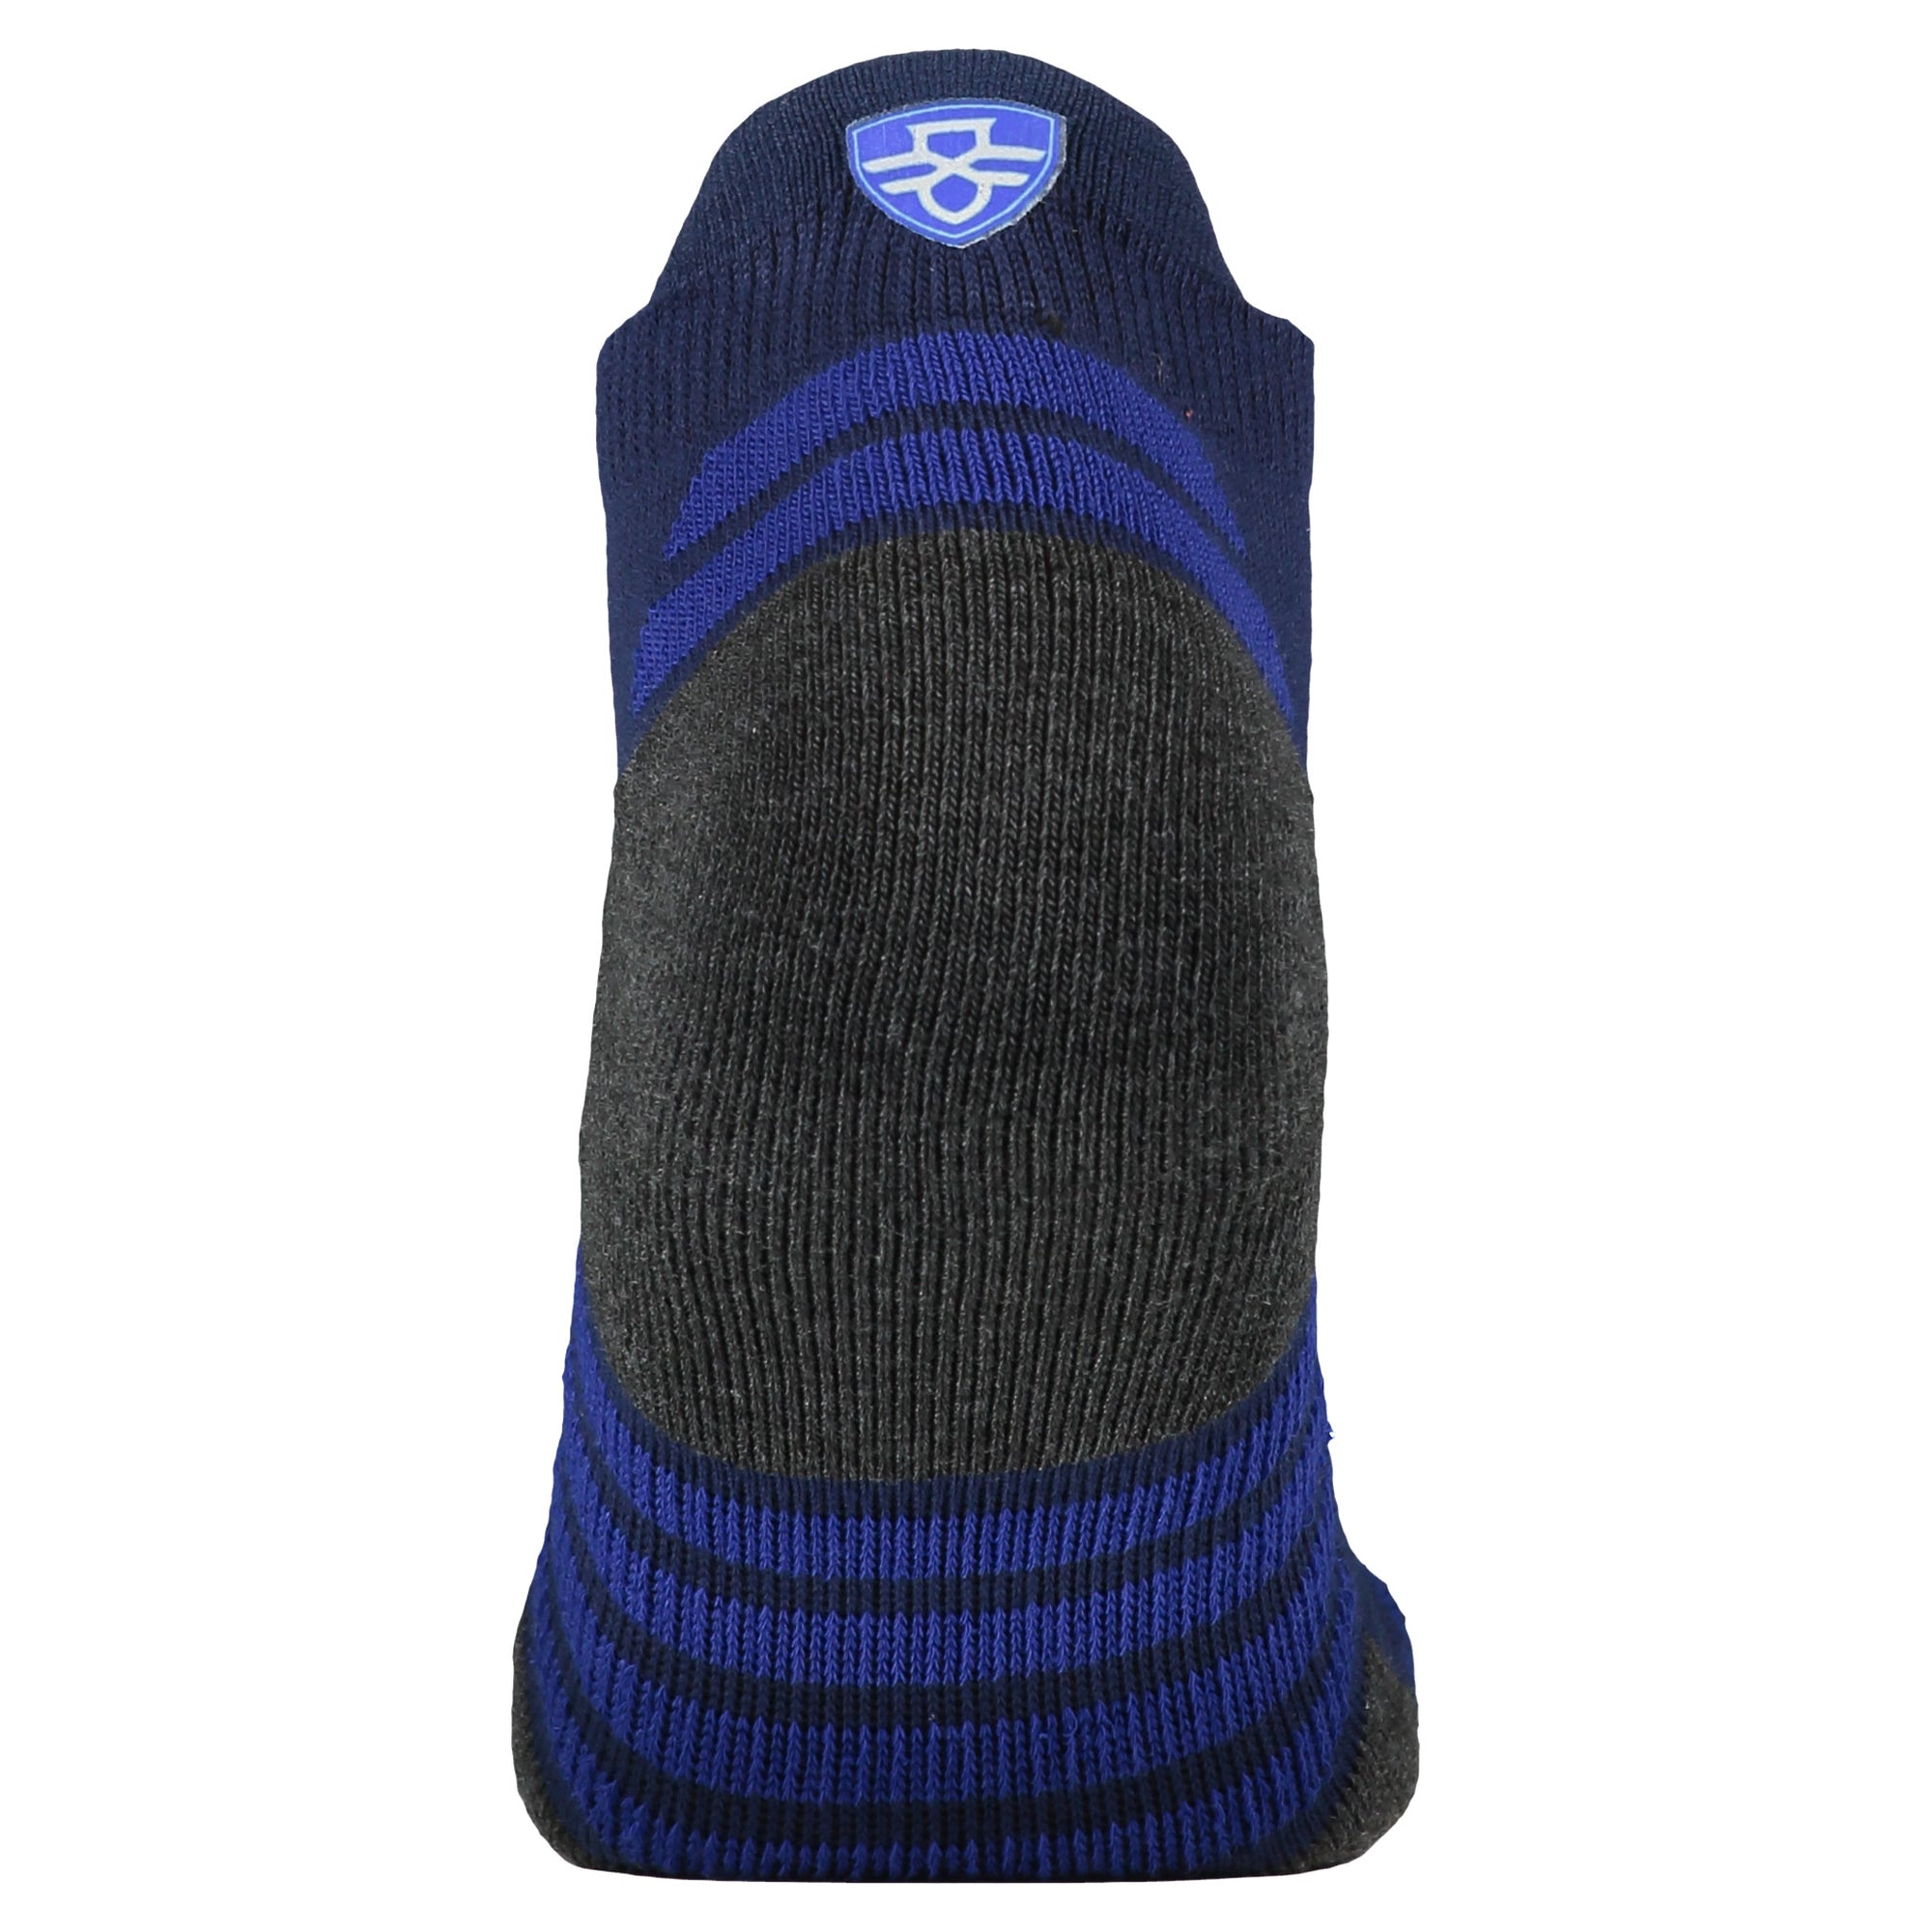 Crossfly men's Tempo Low Socks in navy / royal from the Performance series, featuring AirBeams and 180 Hold.